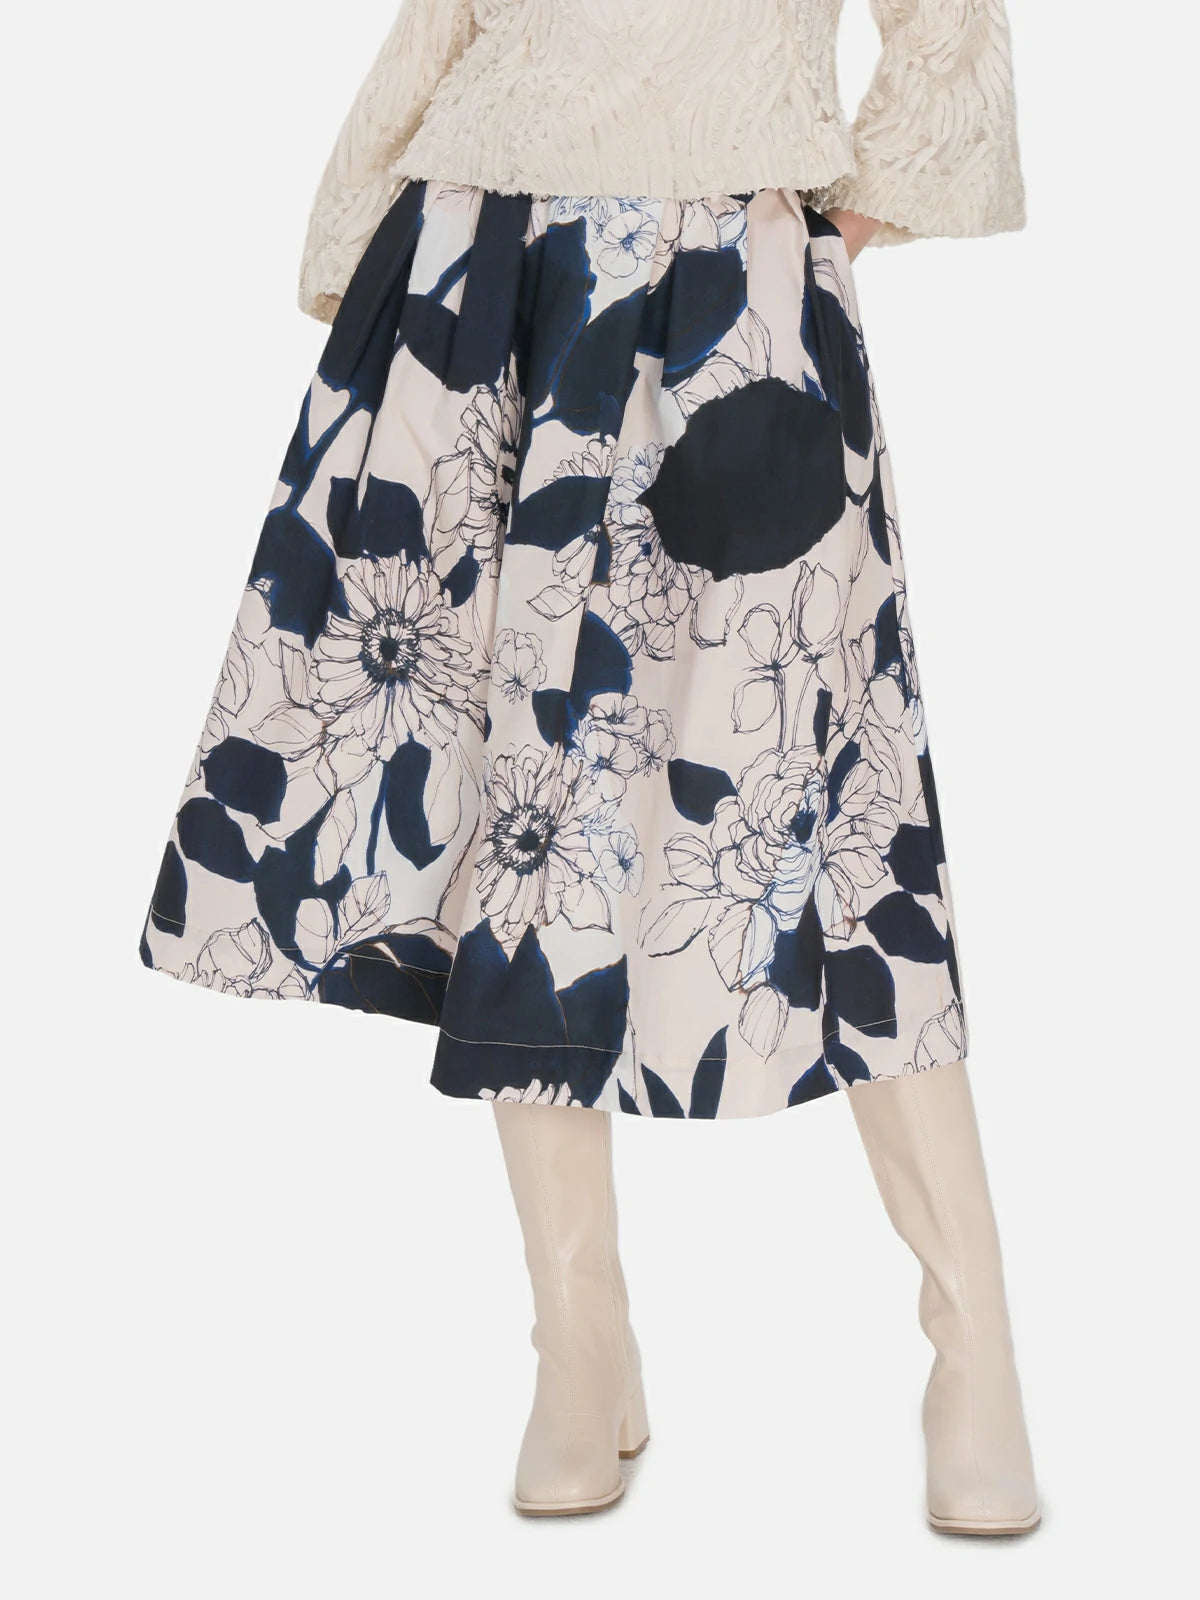 Playful and vibrant floral patterned A-line midi skirt, adding a touch of whimsy to your wardrobe